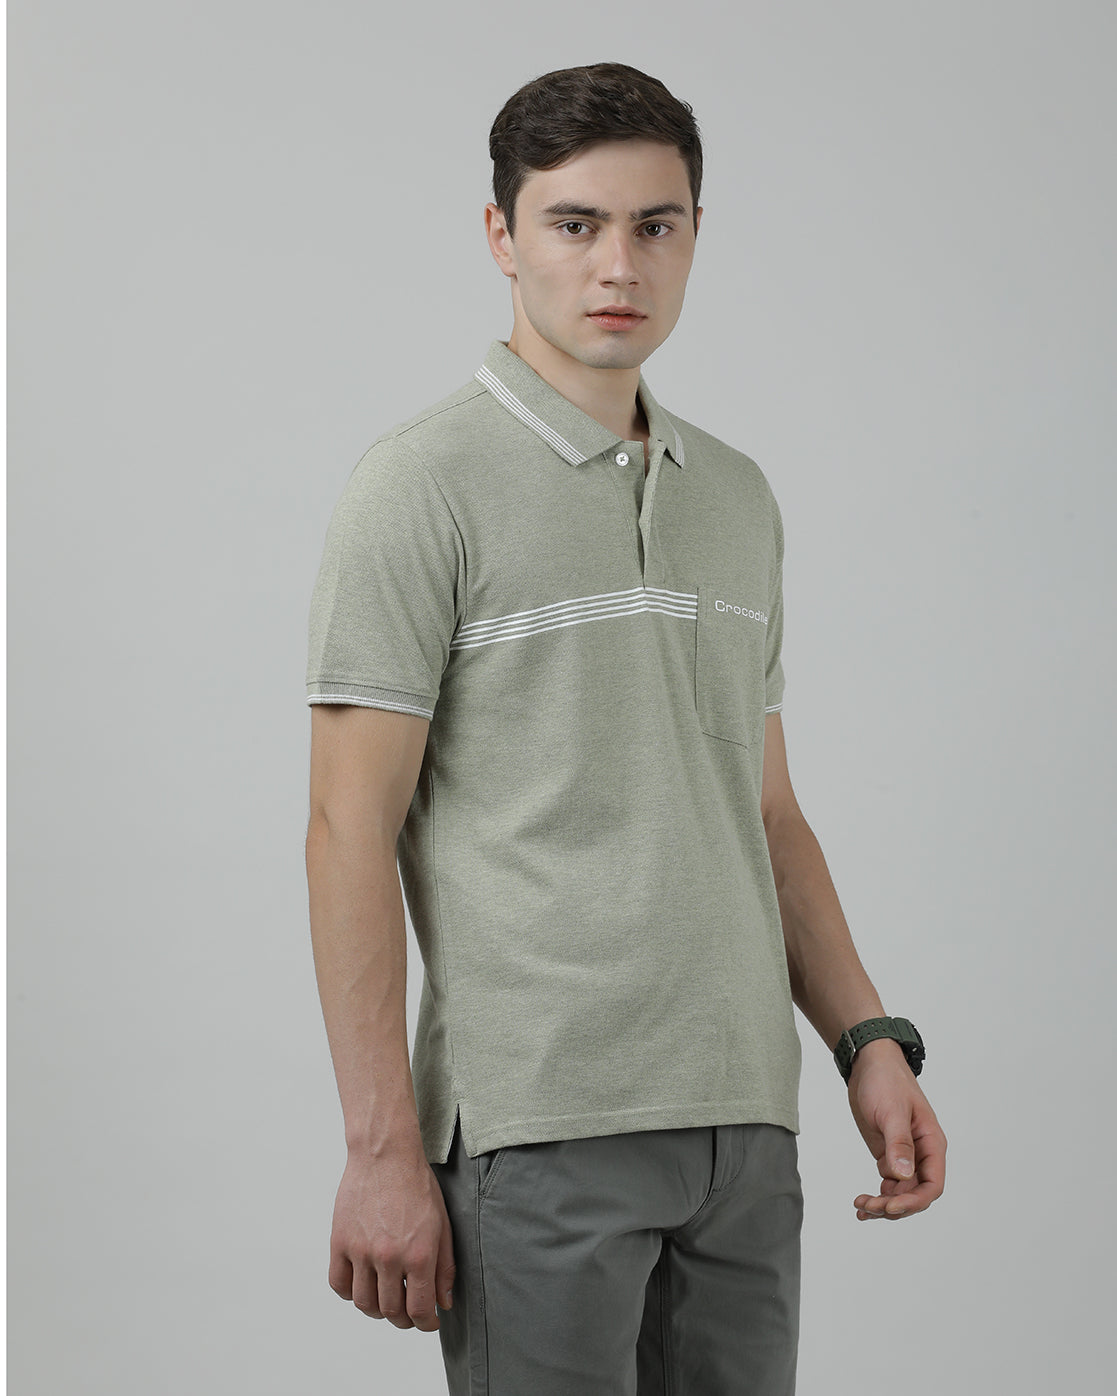 Casual Green Solid Polo Melange Printed T-Shirt Half Sleeve Slim Fit with Collar for Men